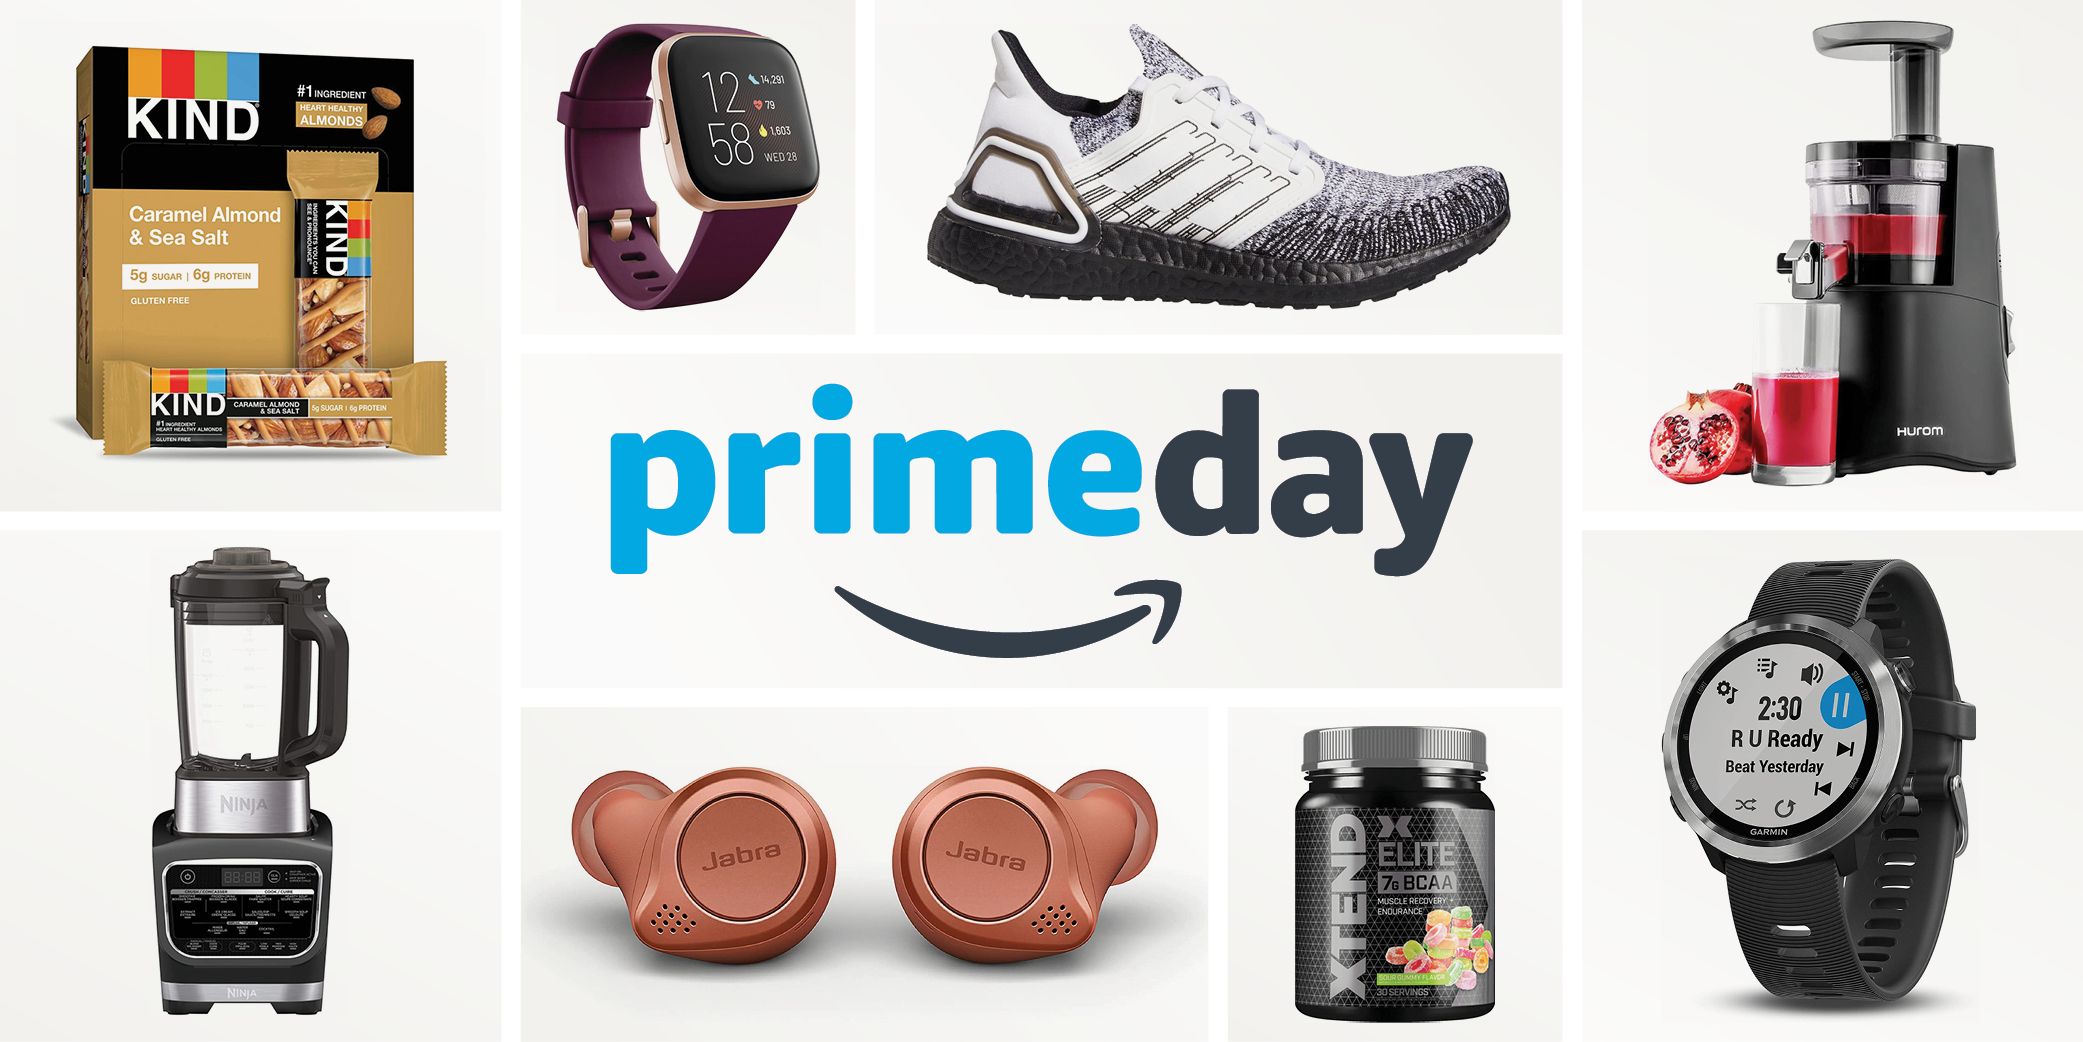 The Best Amazon Prime Day Deals for Runners